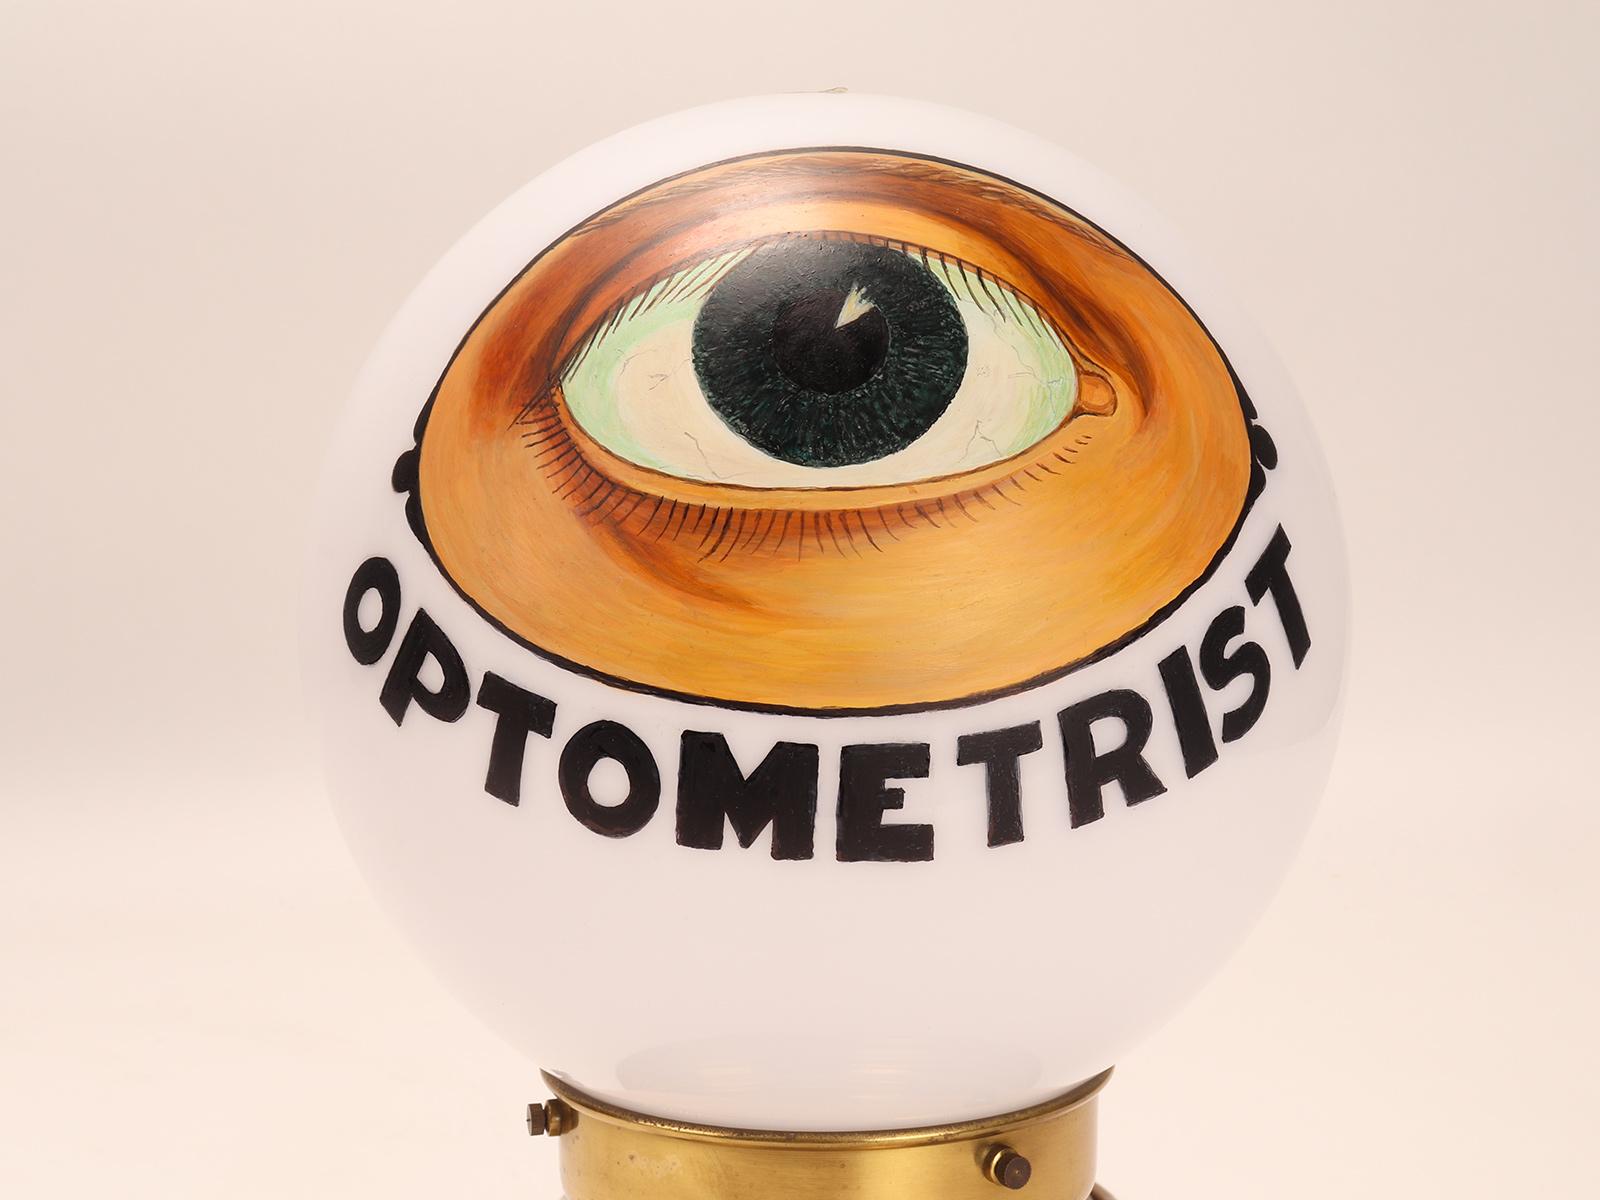 Shop Window Lamp Sign for an Optometrist, USA1950 In Good Condition For Sale In Milan, IT